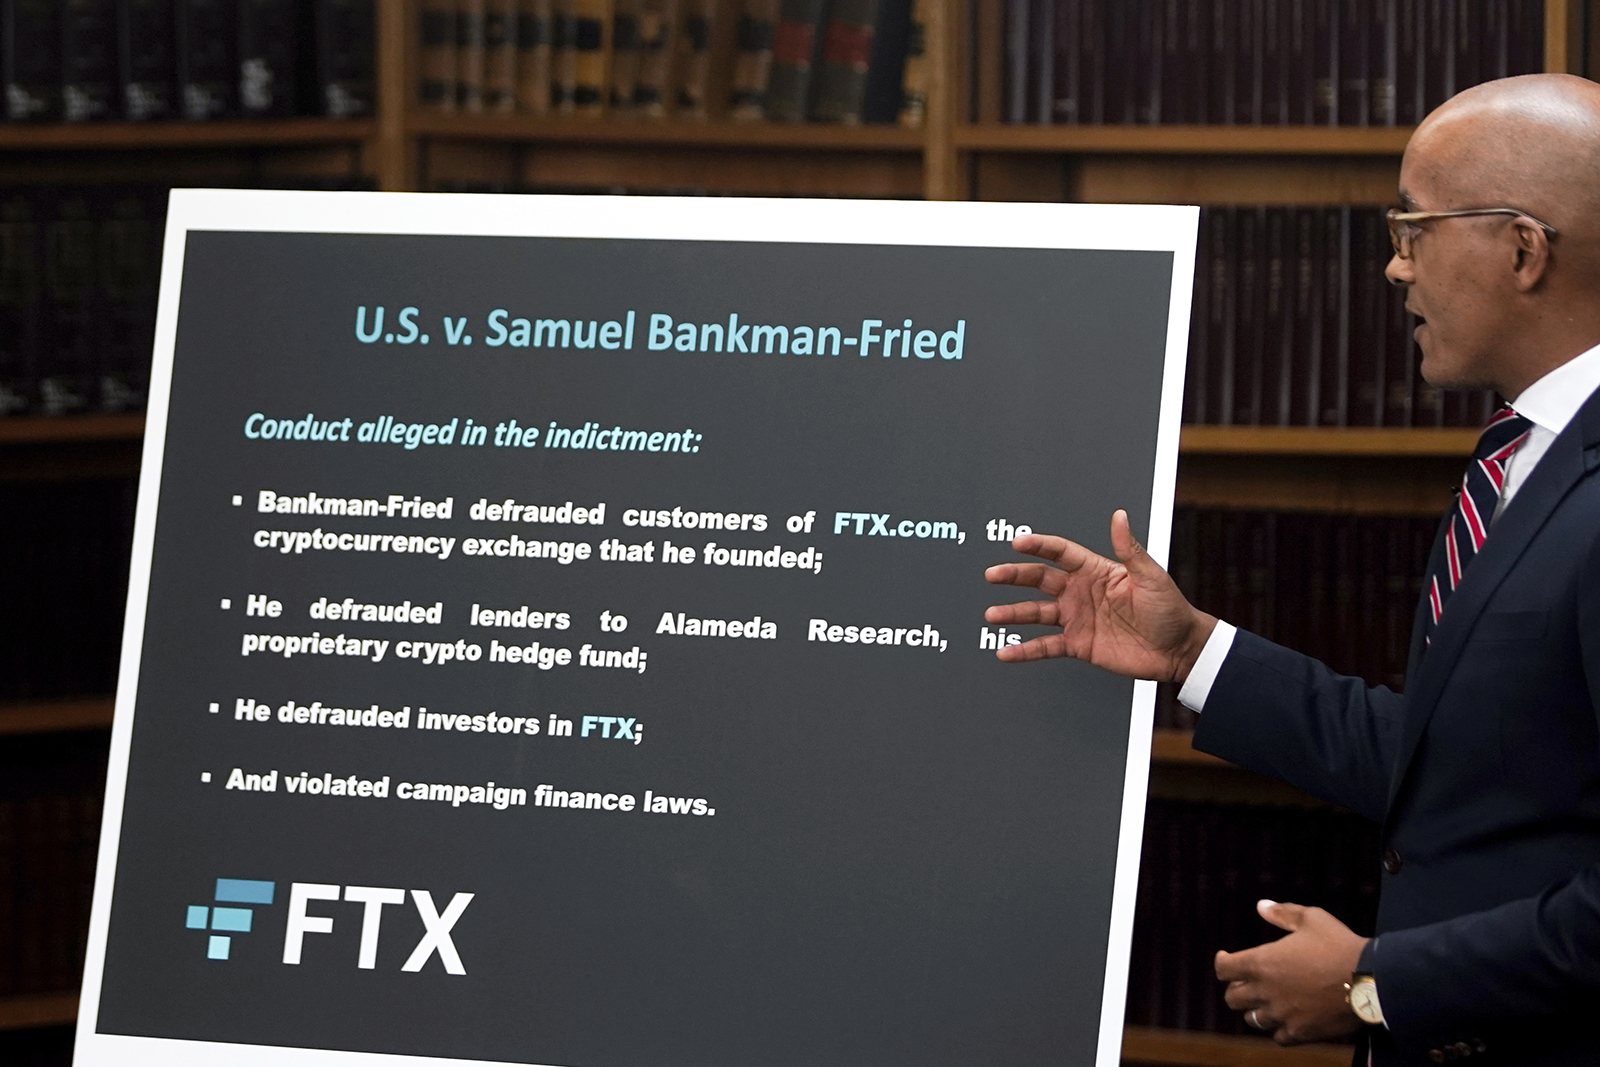 U.S. Attorney Damian Williams speaks during a news conference about the criminal charges filed against FTX founder Sam Bankman-Fried, today in New York. The U.S. Securities and Exchange Commission has charged the former CEO of failed cryptocurrency firm FTX with orchestrating a scheme to defraud investors. 